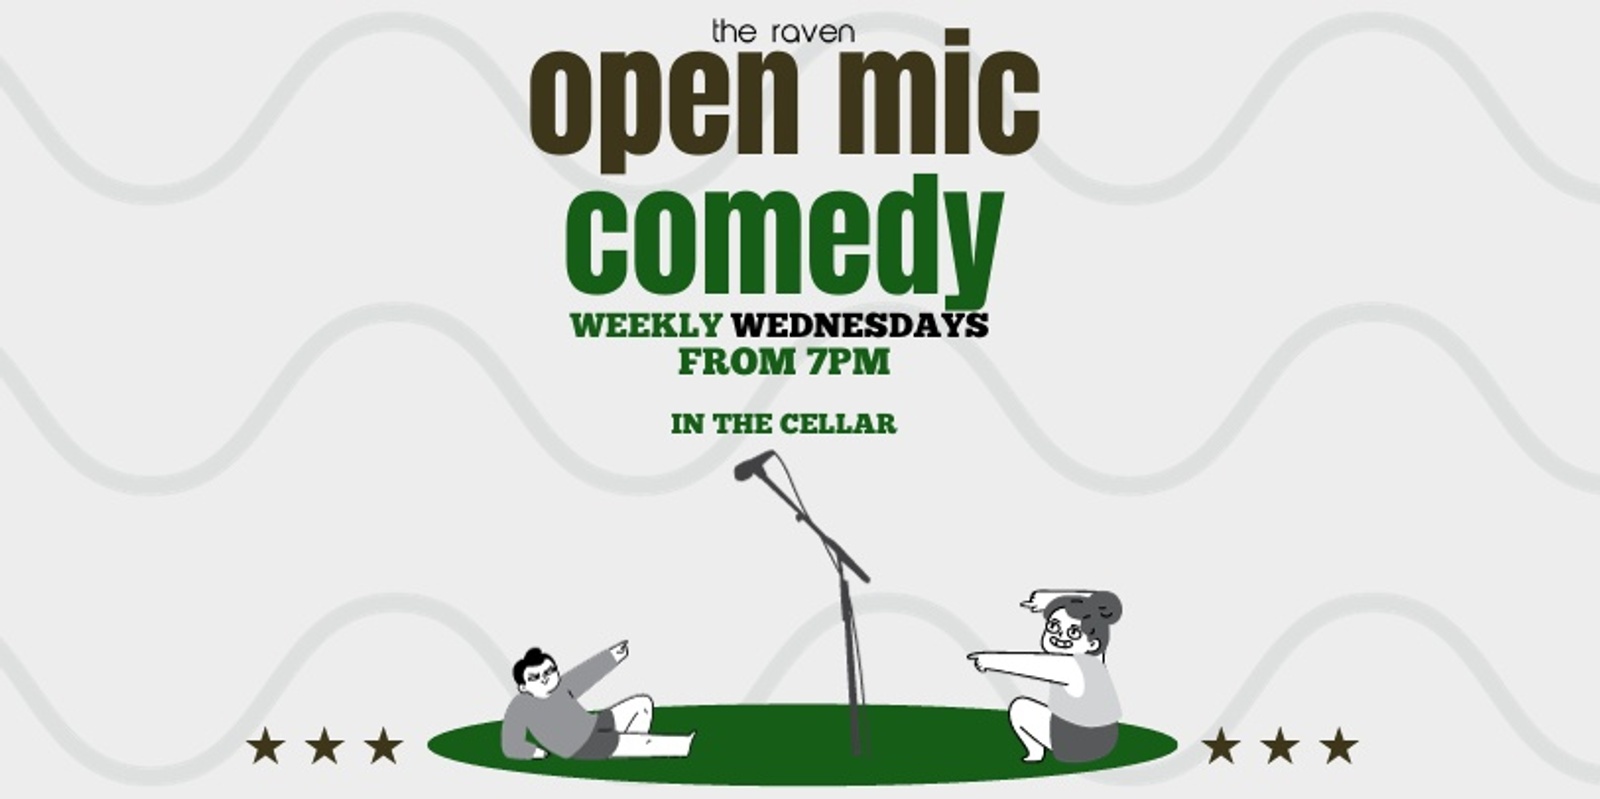 Banner image for Weekly Wednesday Open Mic Comedy